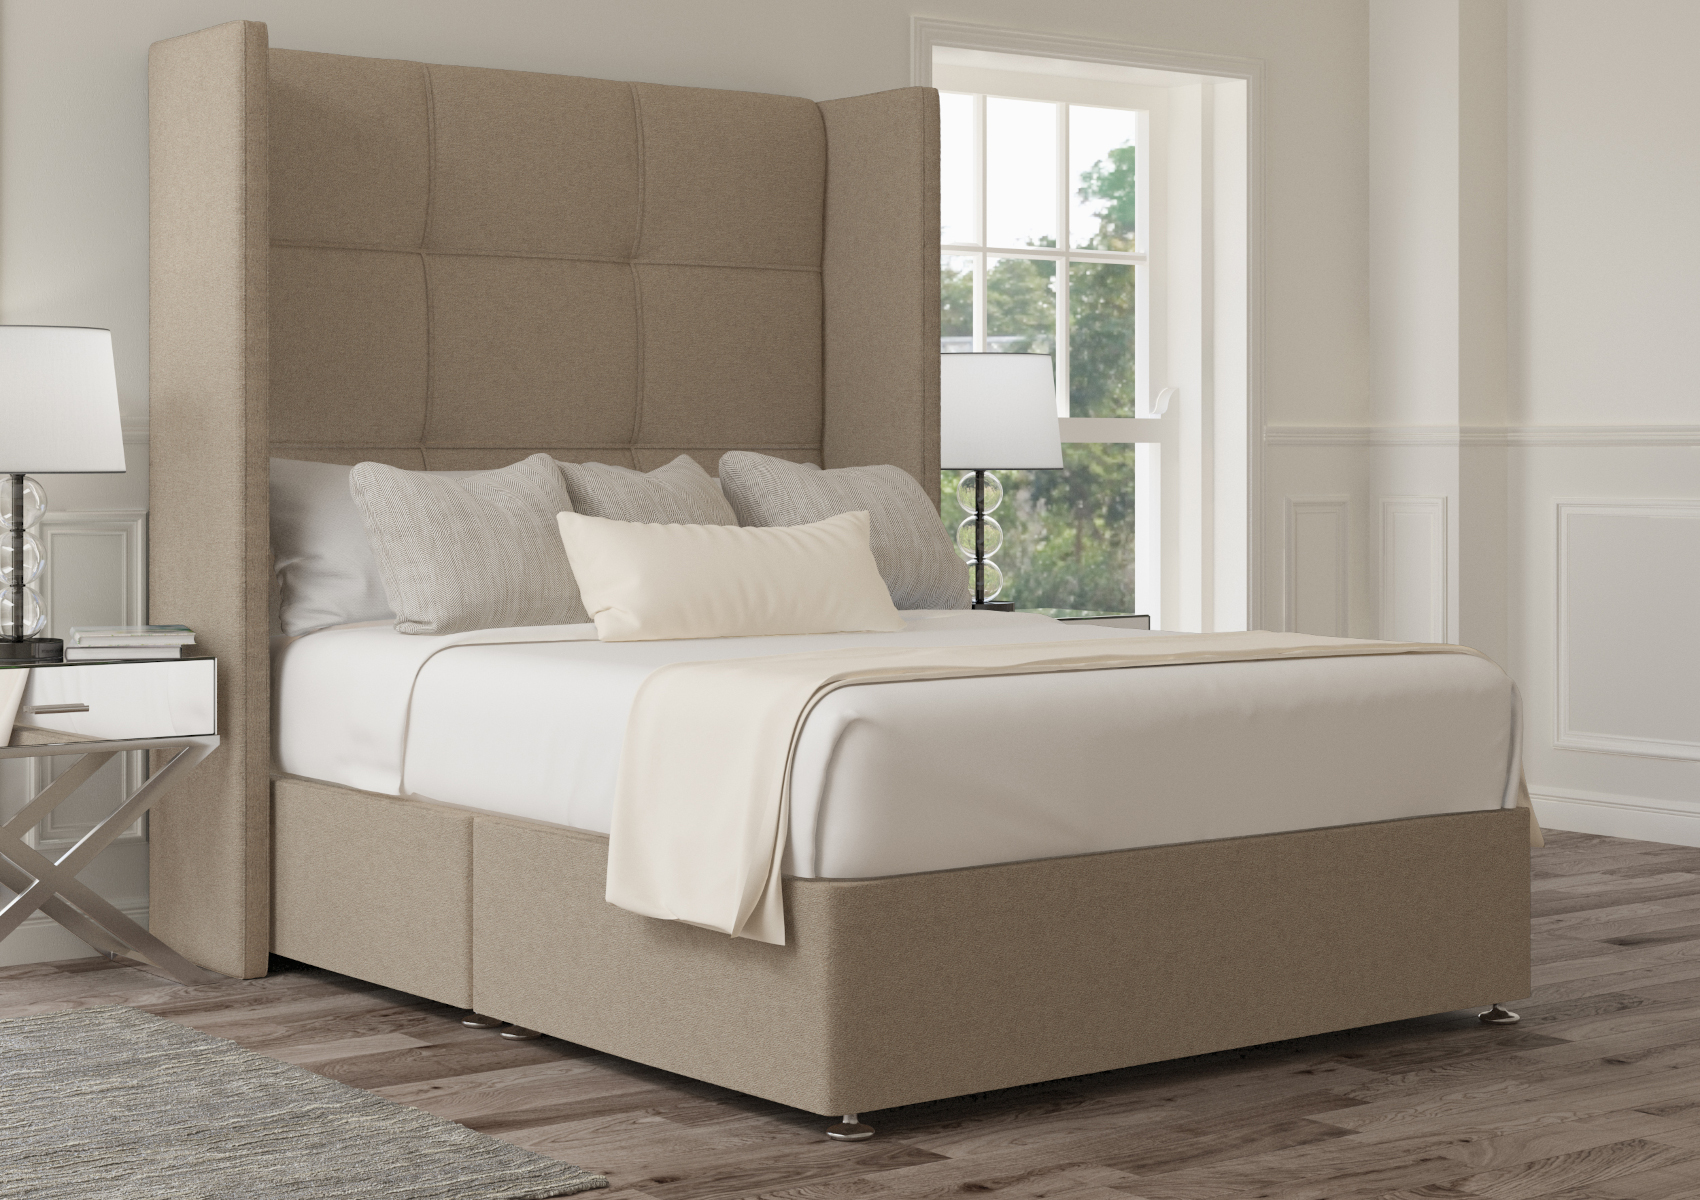 View Oaklyn Arran Cyan Upholstered King Size Winged Bed Time4Sleep information